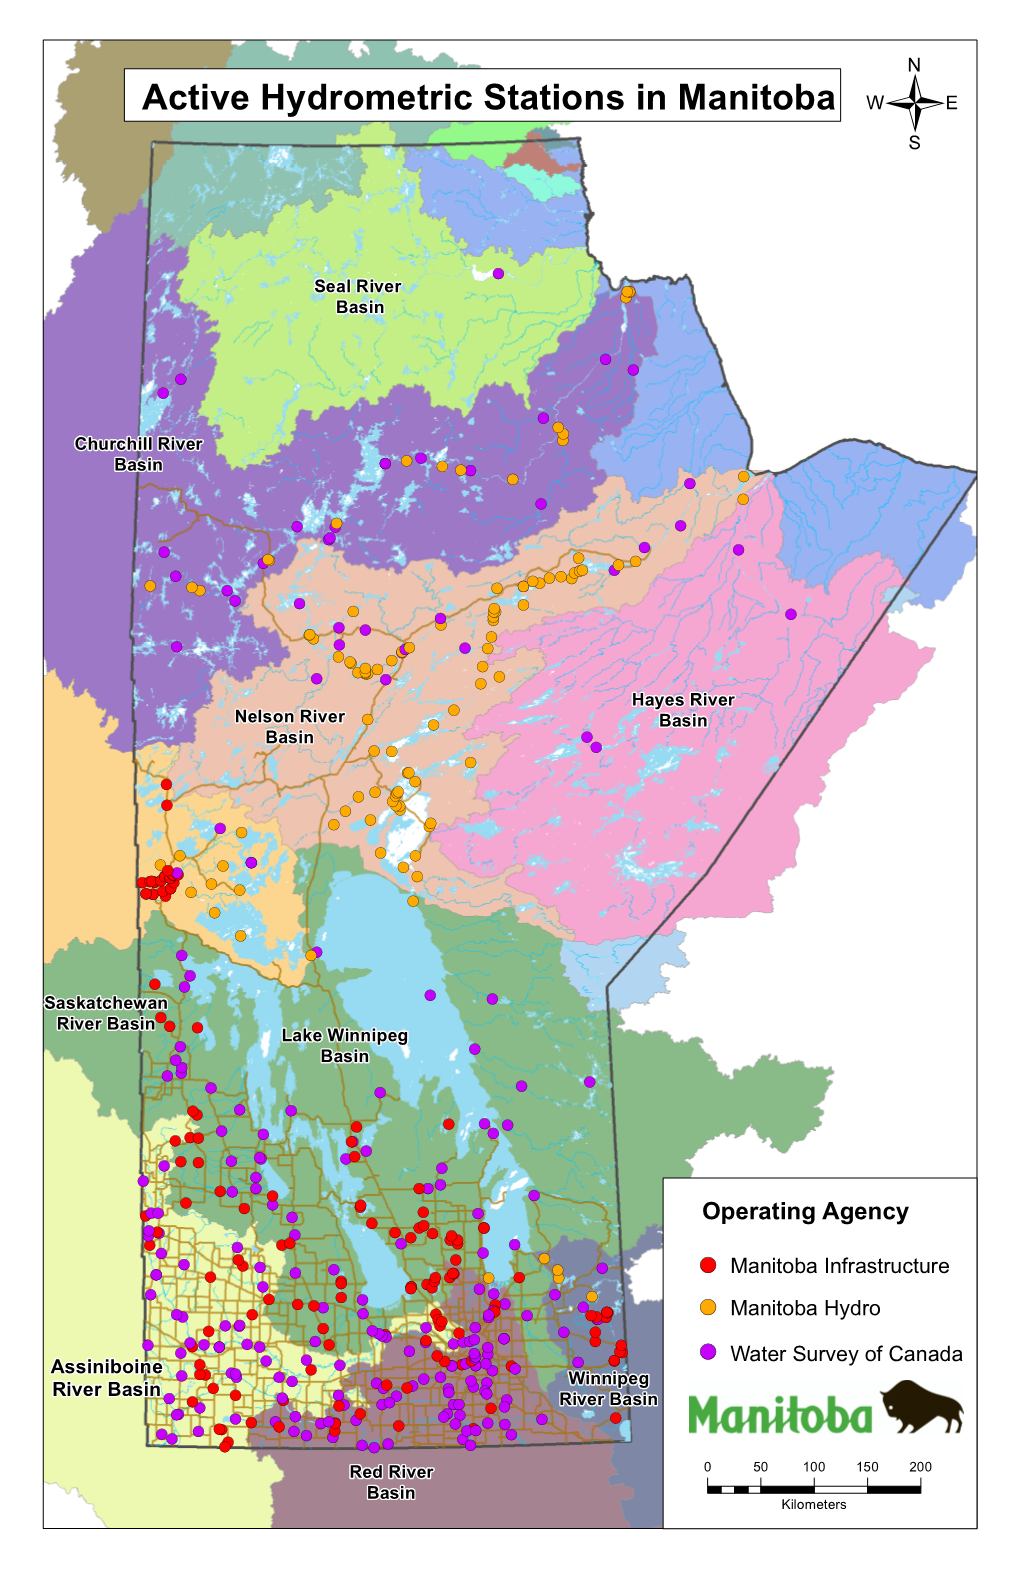 Active Hydrometric Stations in Manitoba